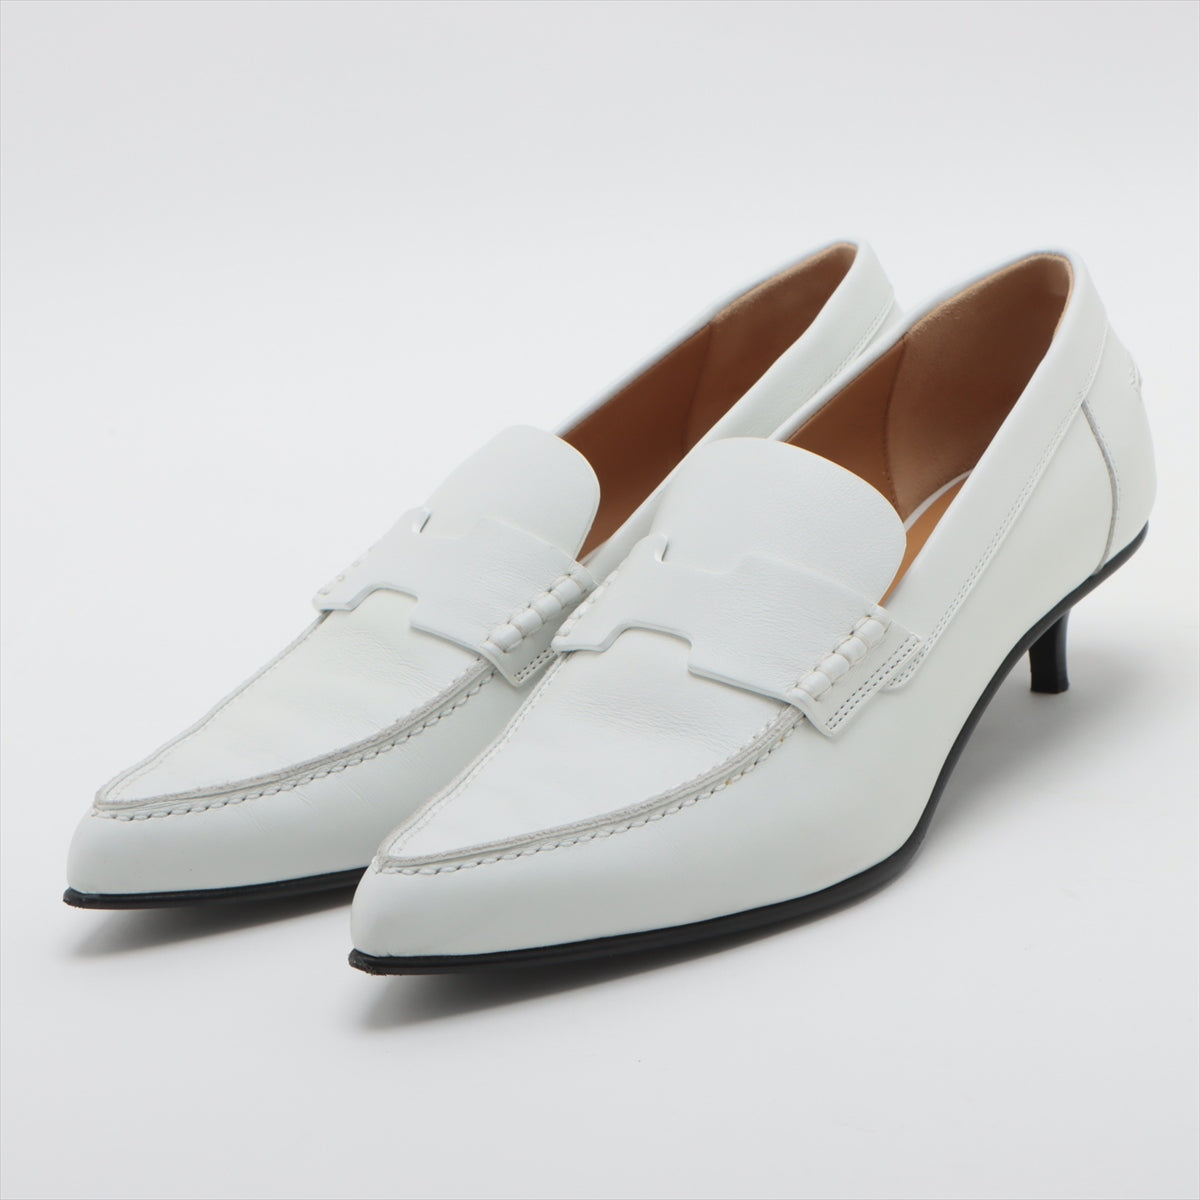 Hermès グロリアス Leather Pumps 37.5 Ladies' White 替えリフト付き box There is a storage bag